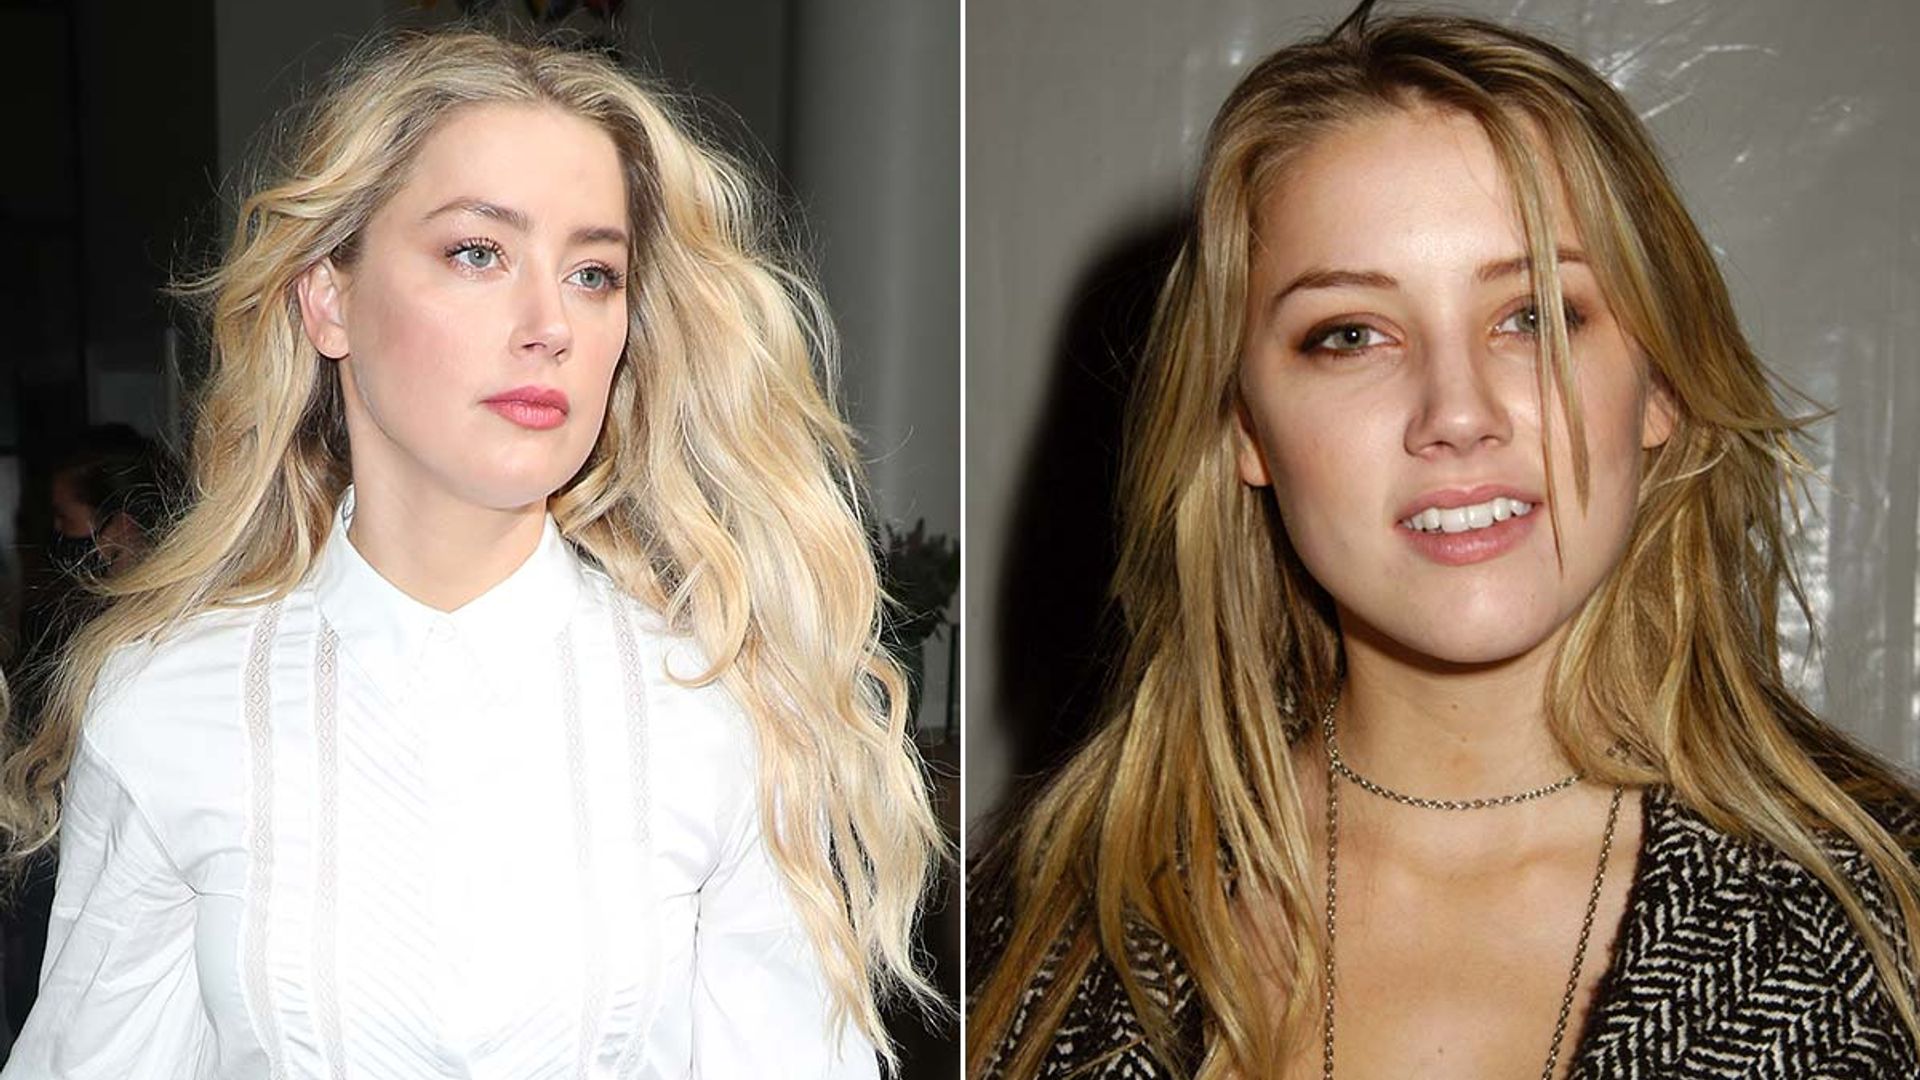 Has Amber Heard had plastic surgery? A top surgeon reveals all - see the transformation